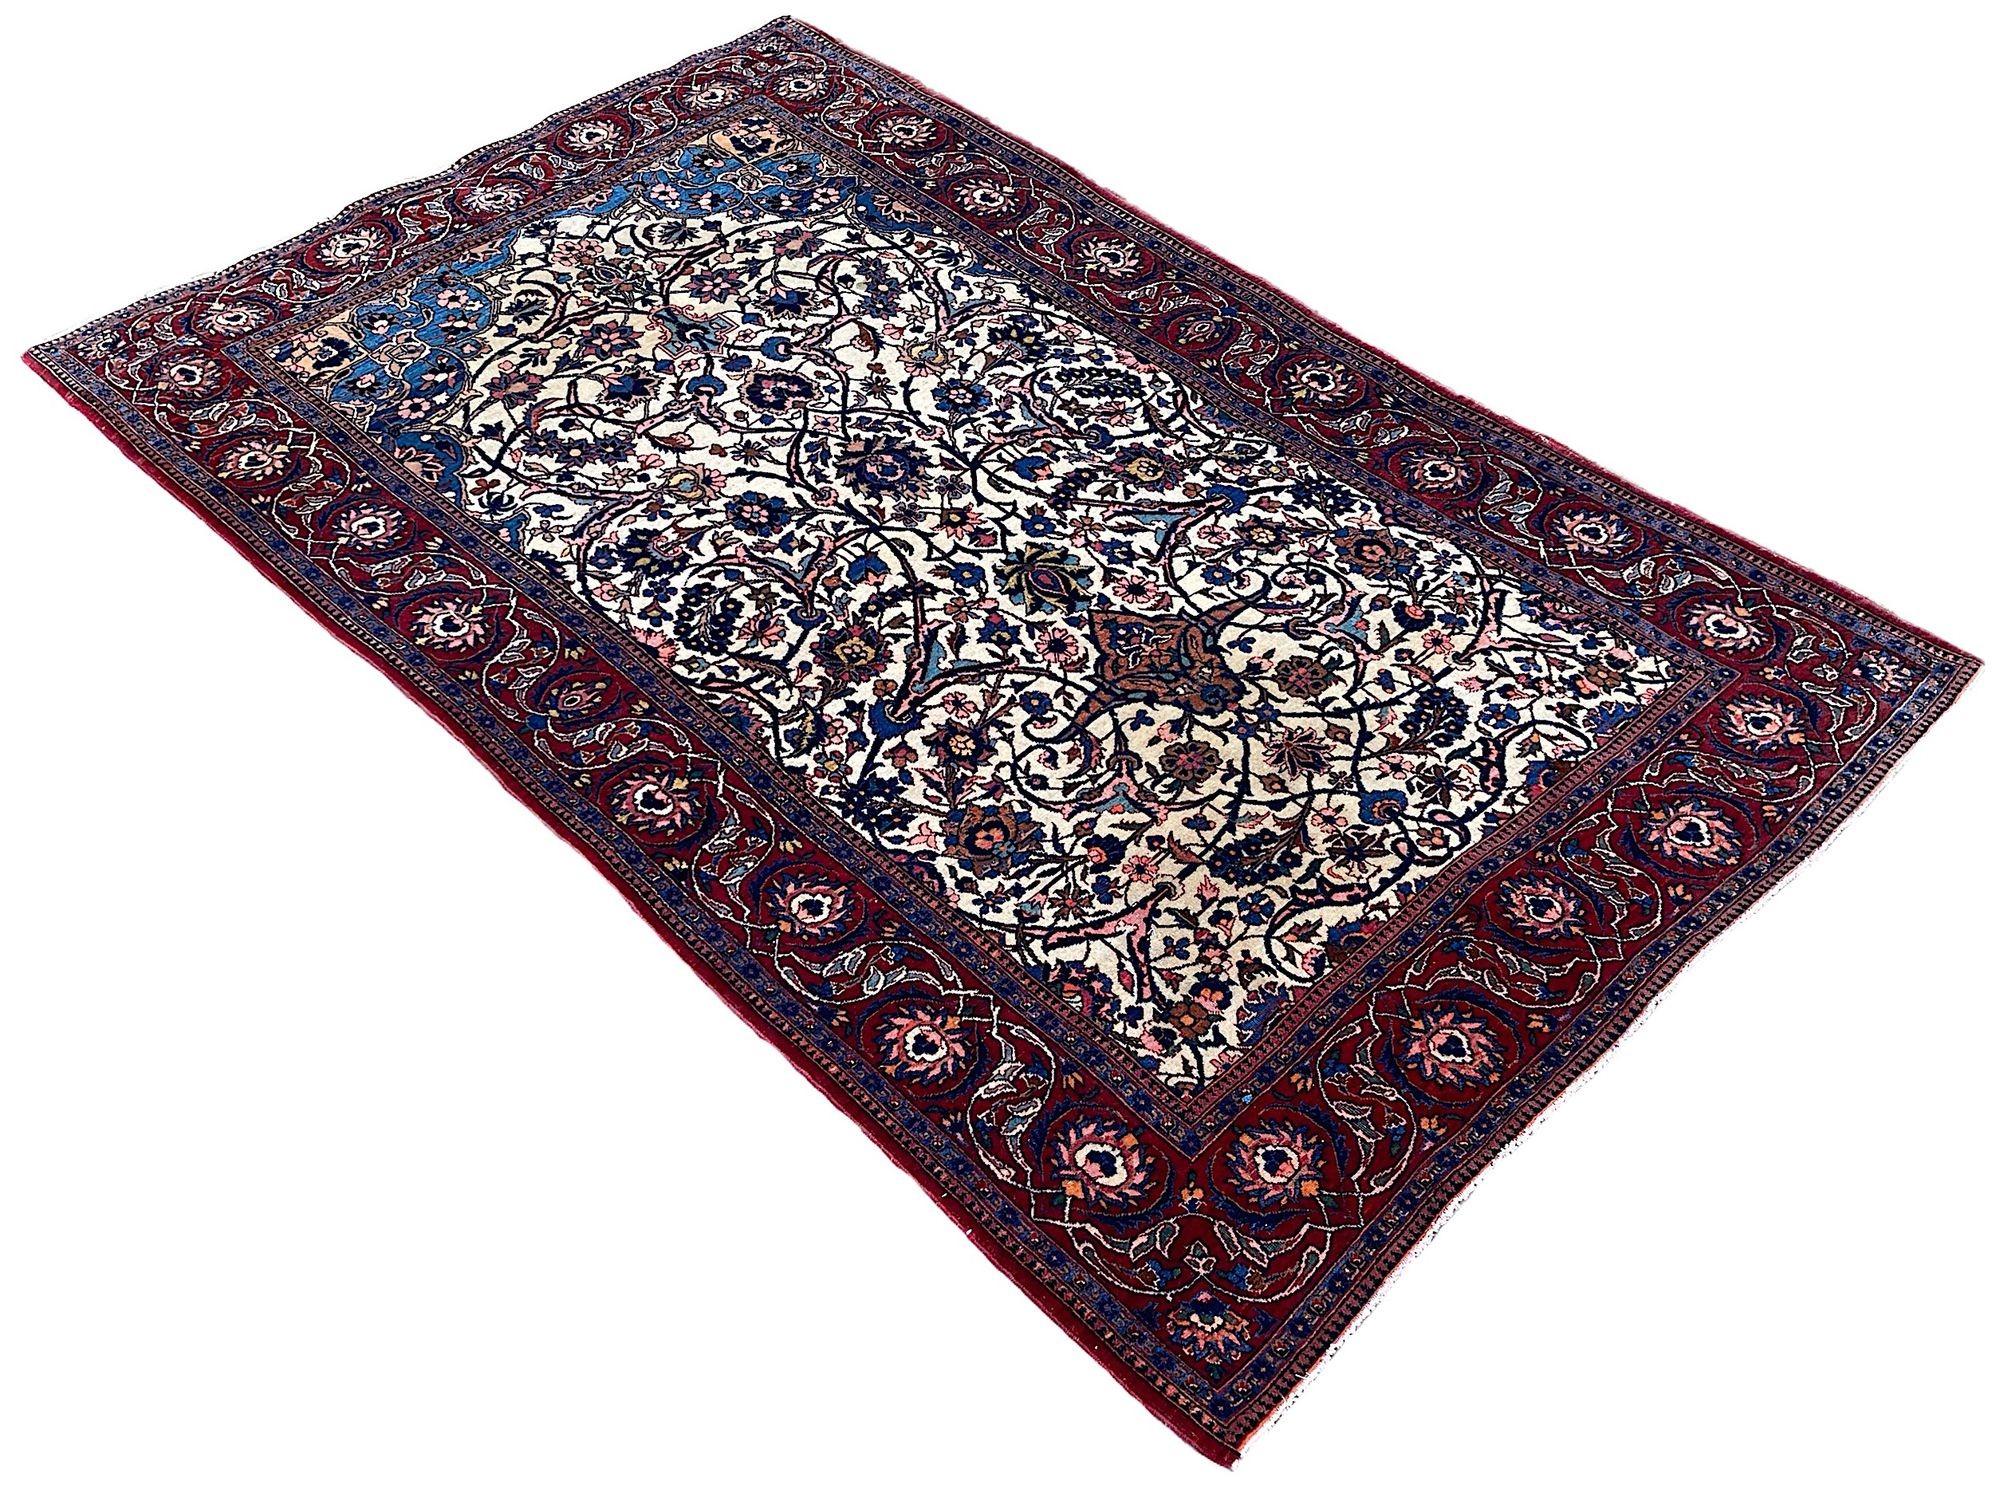 Antique Kashan Rug 2.12m x 1.31m In Good Condition For Sale In St. Albans, GB